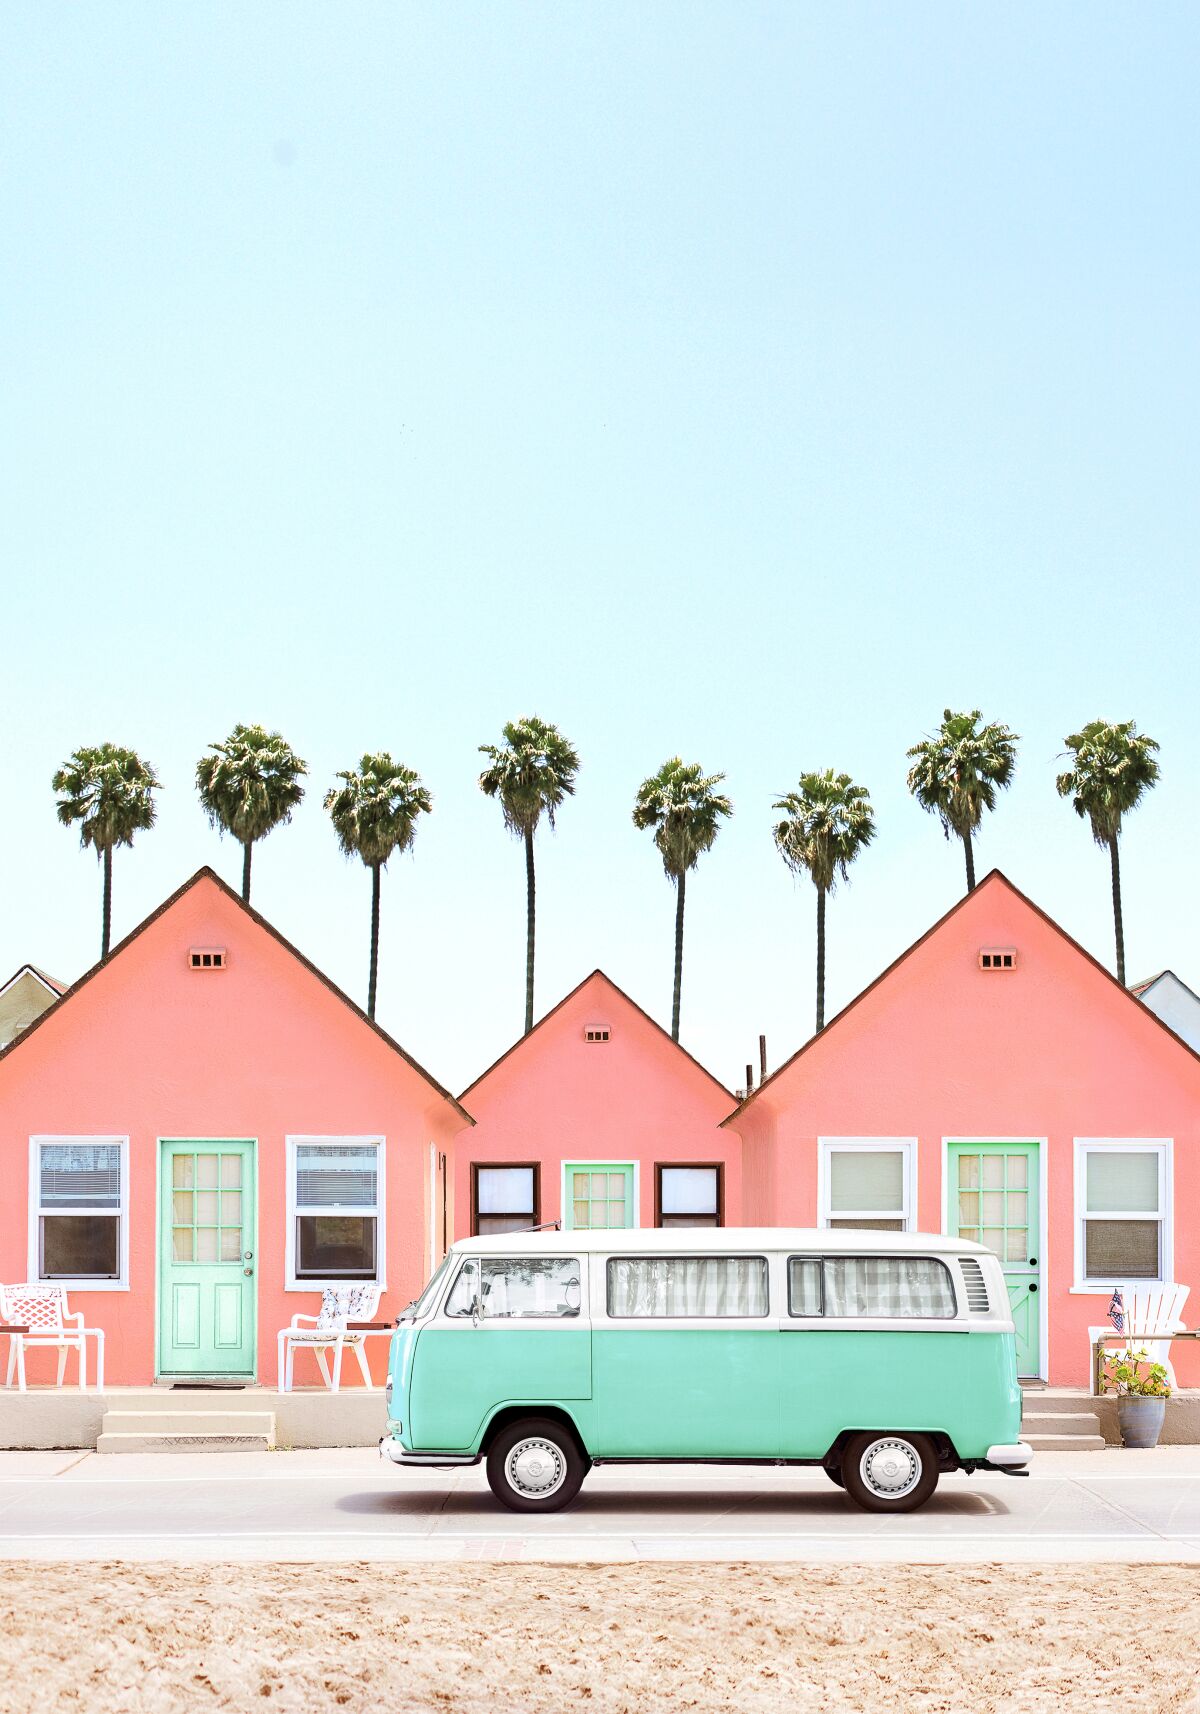 Pink cabins and a mint green Volkswagen bus